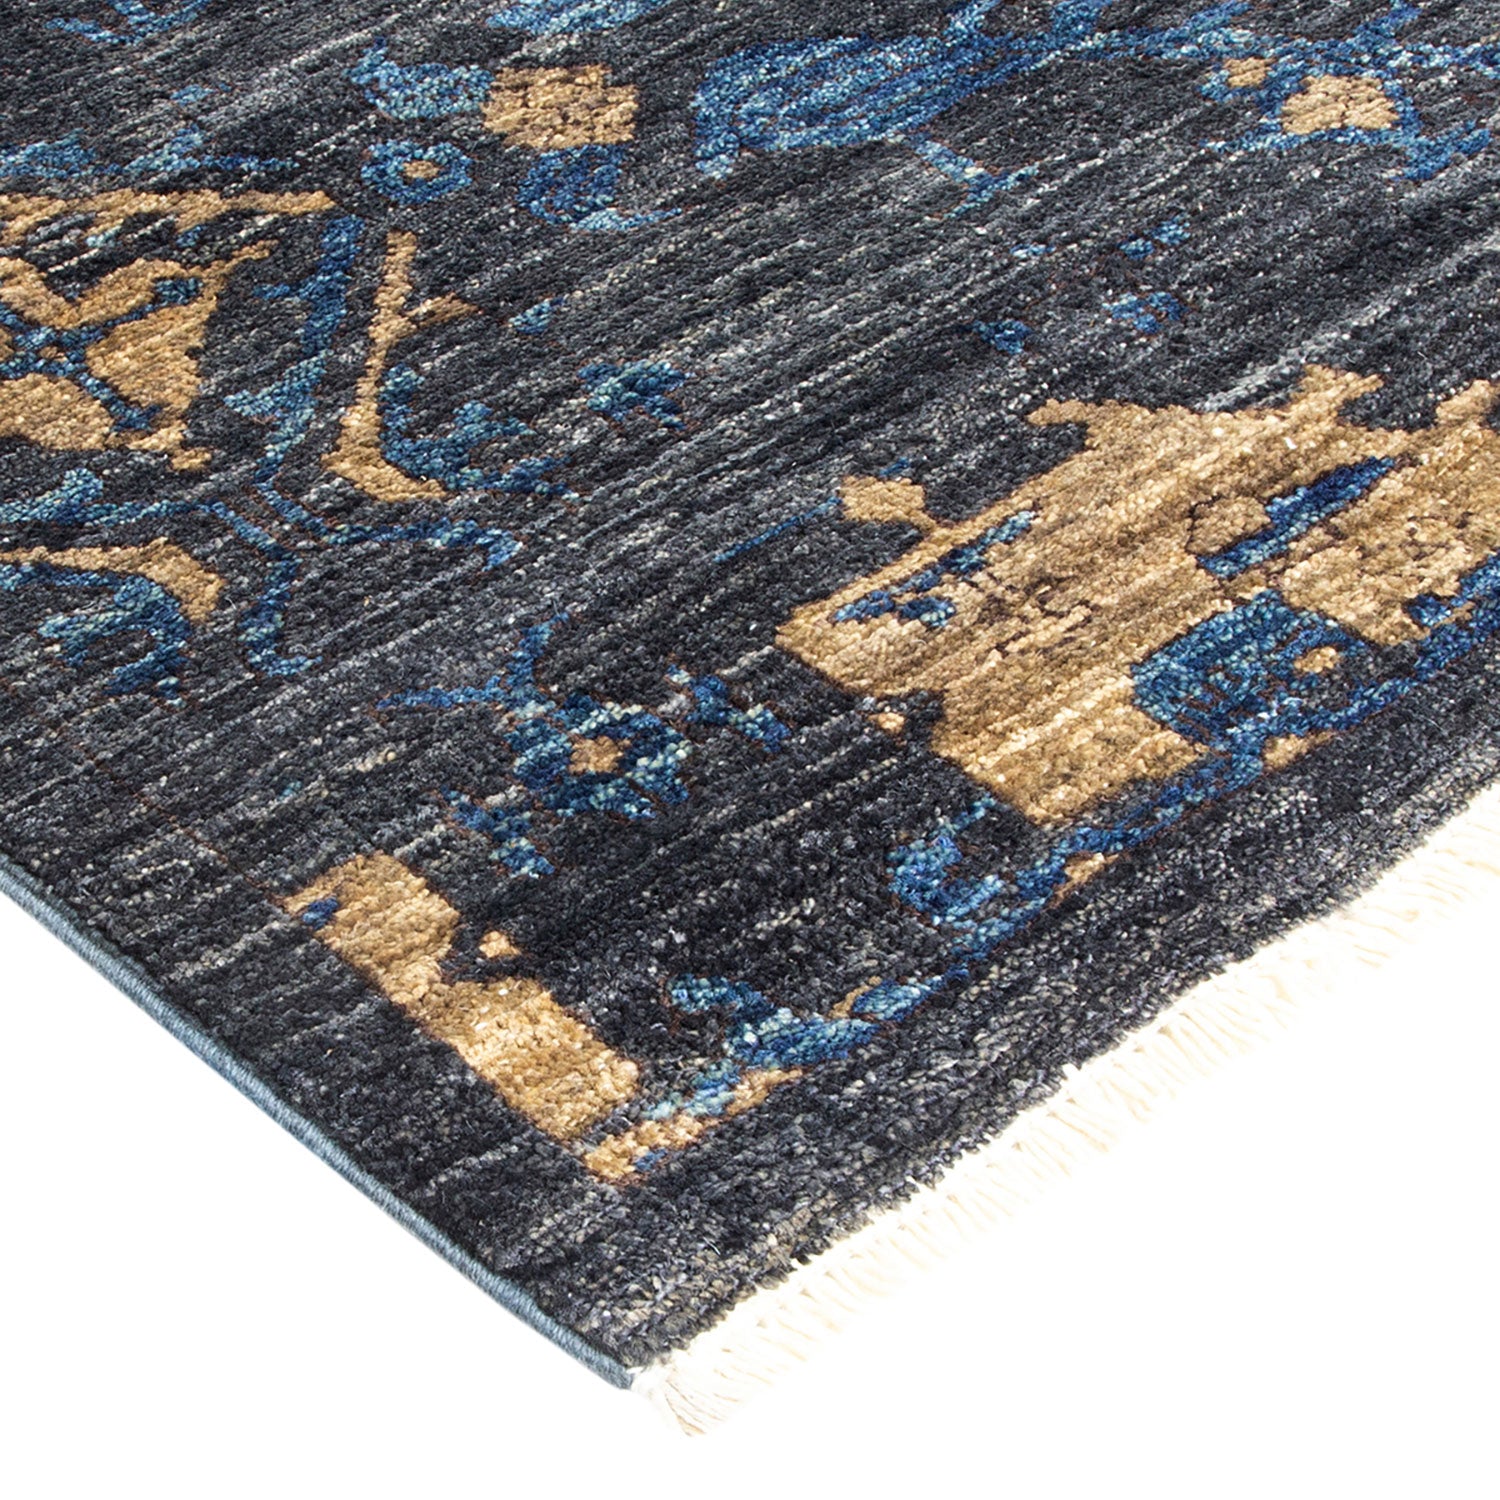 Exquisite Persian-style rug with ornate blue and gold patterns.